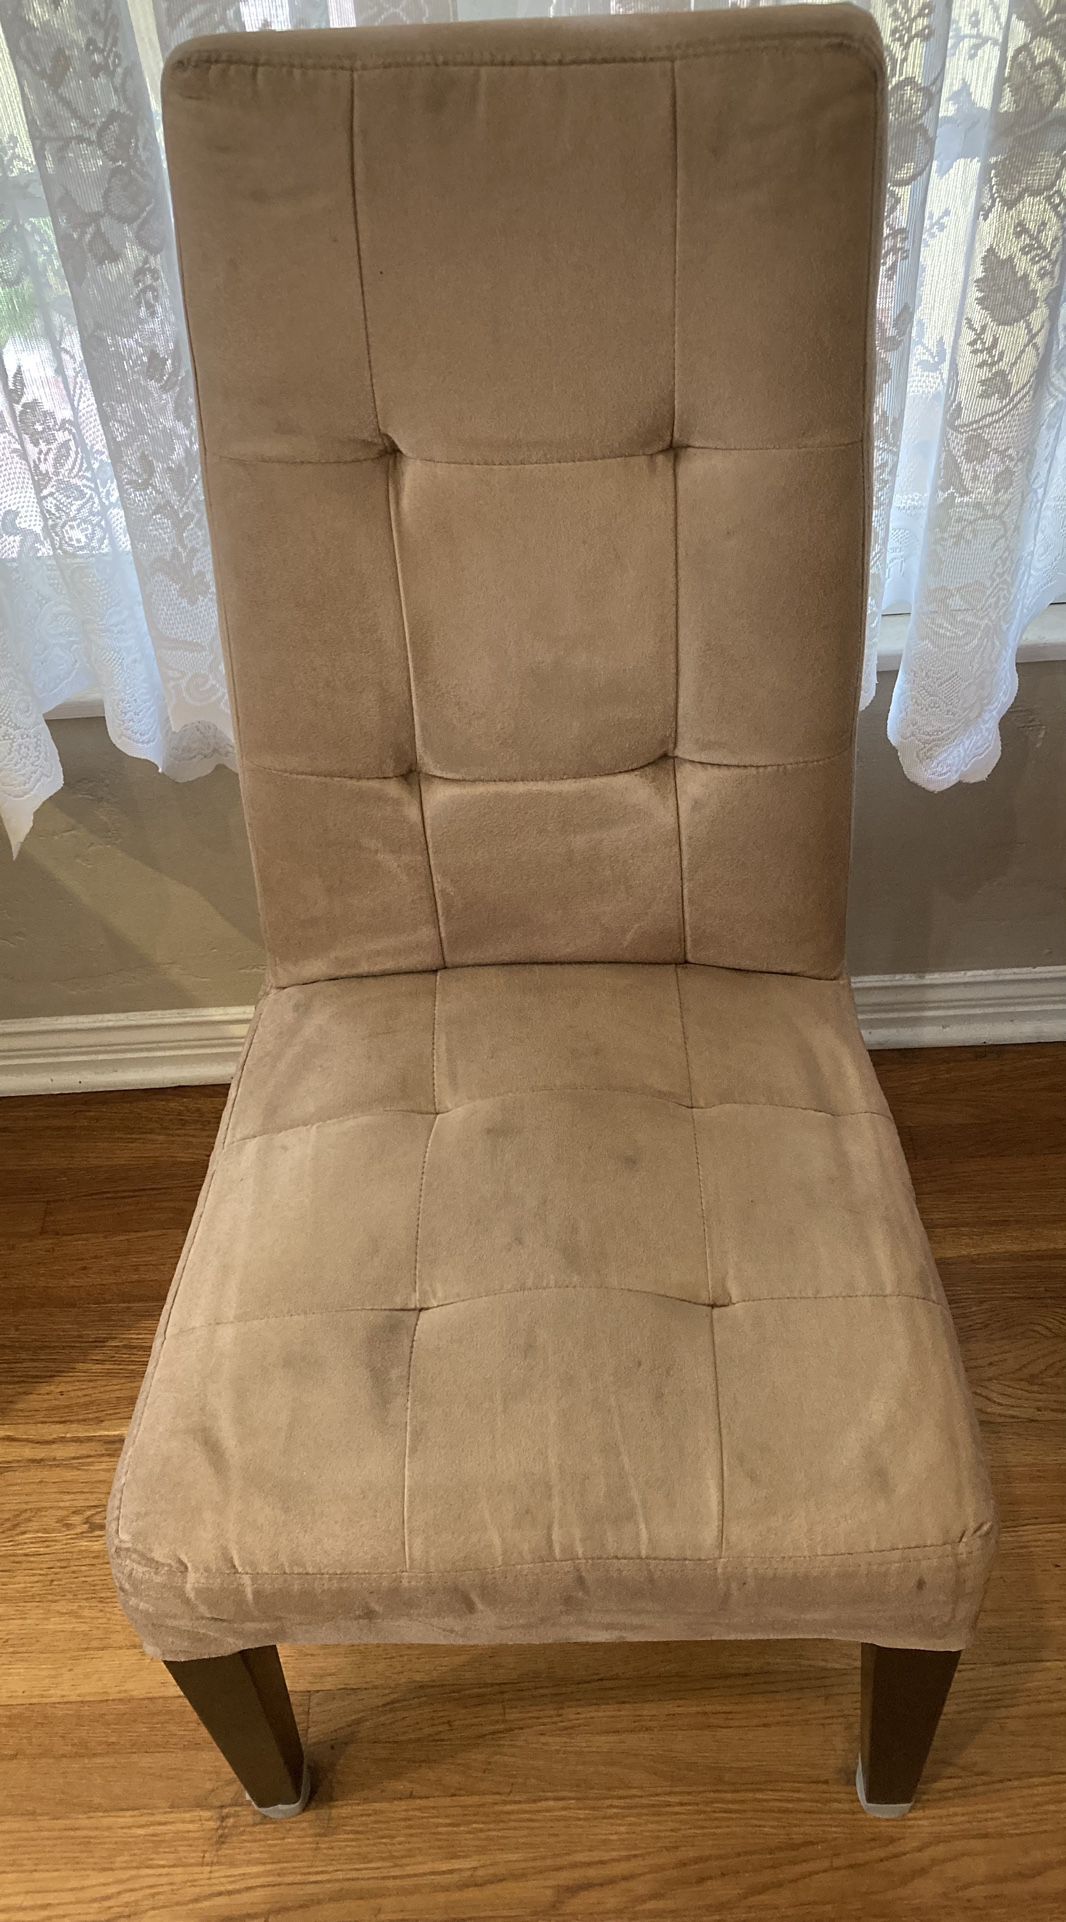 10 Dining room Chairs. $25 Each